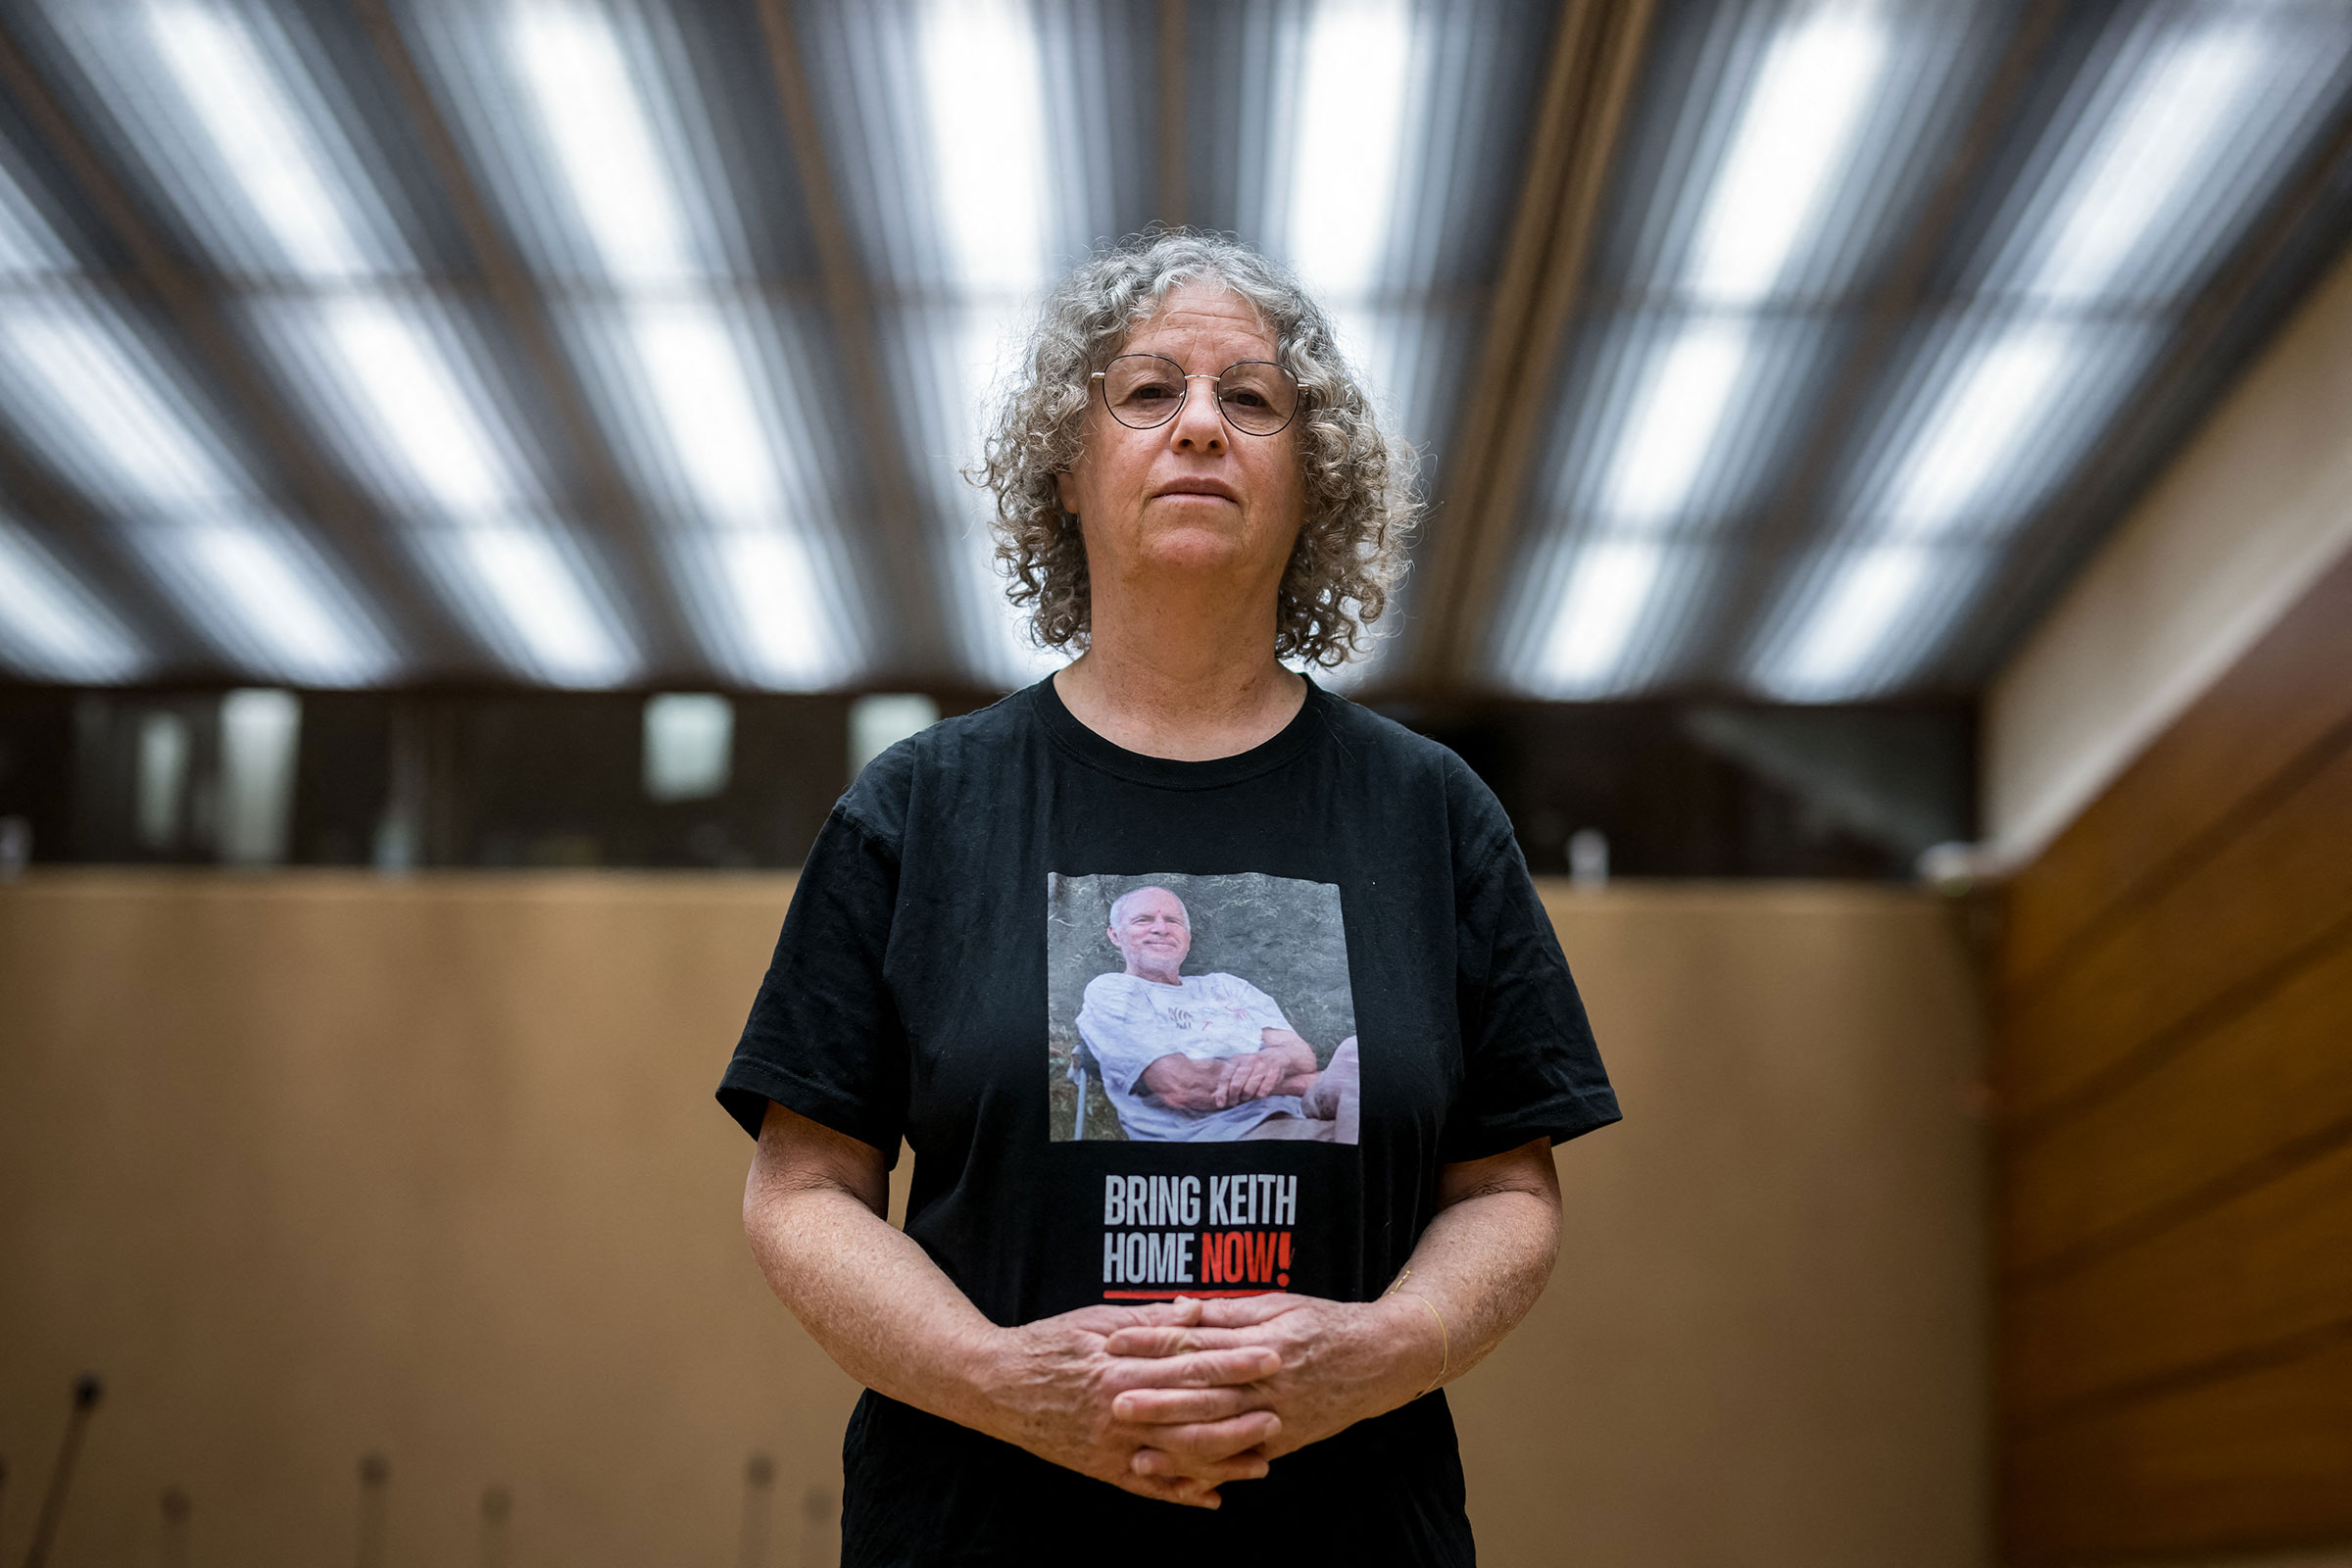 Former Hamas hostage Aviva Siegel poses with a t-shirt showing a picture of her husband Keith Siegel during an interview with AFP during her visit to the 55th session of the UN Human Rights Council in Geneva on Feb. 28, 2024.